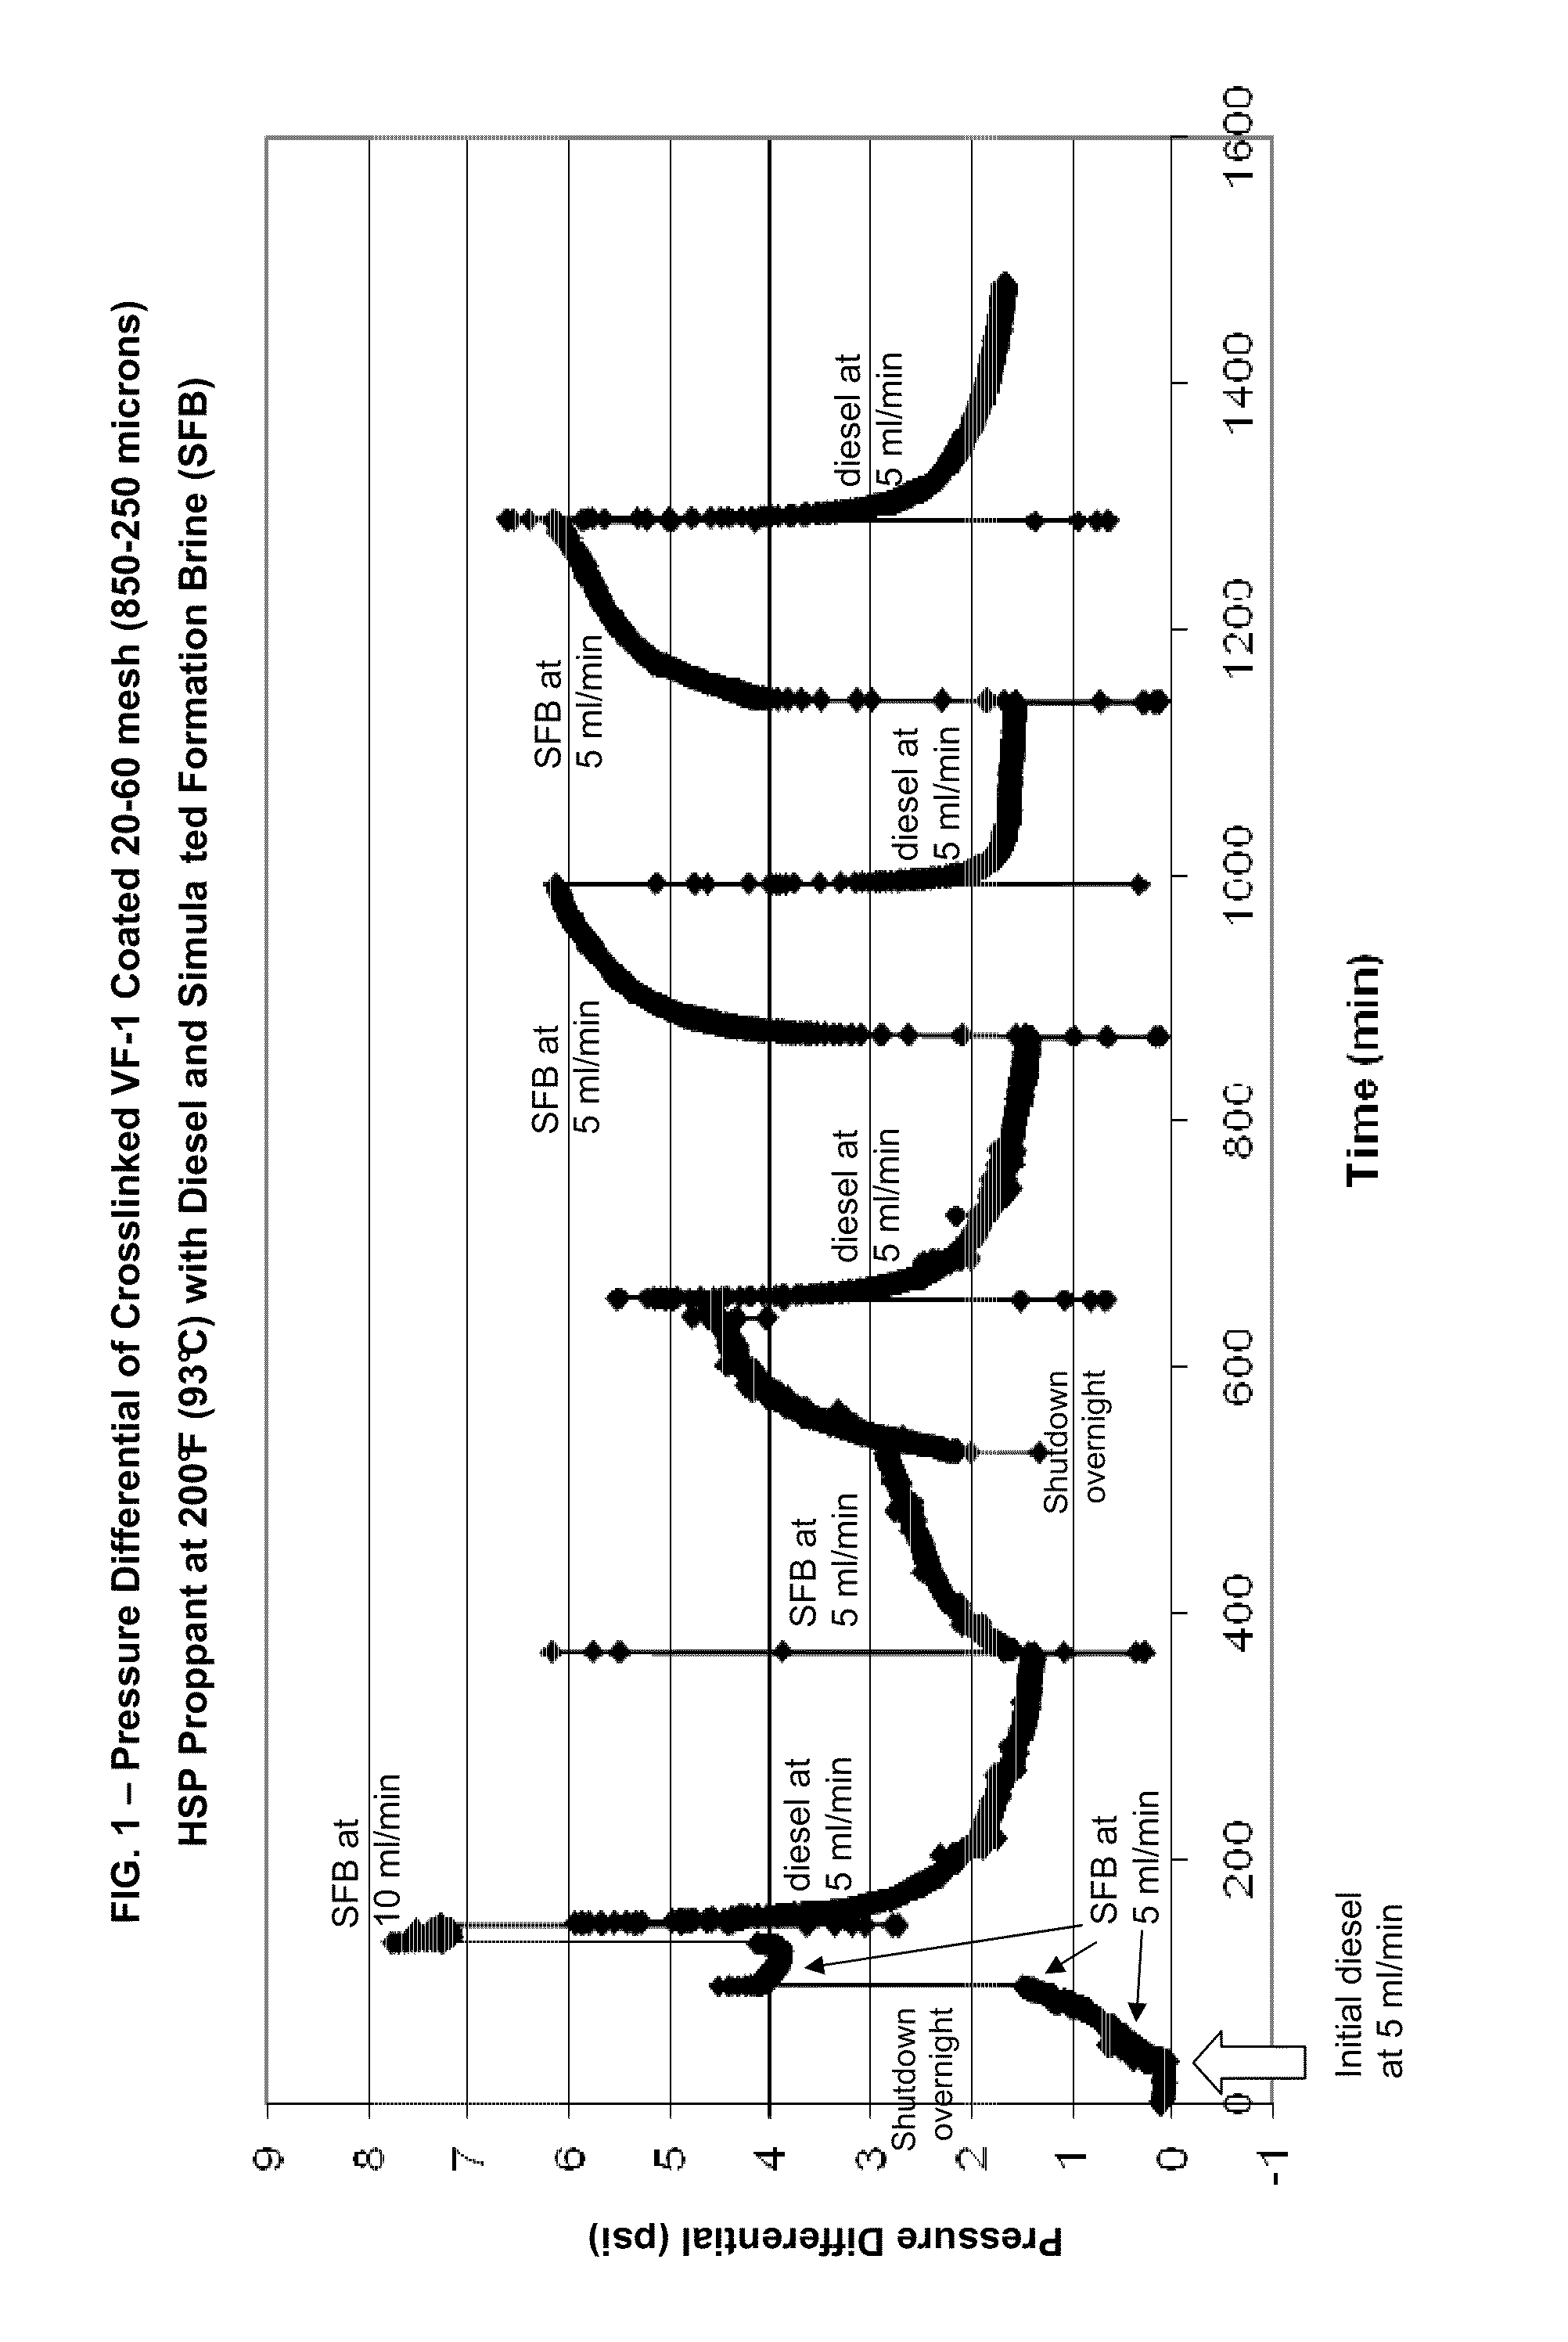 Method of Controlling Water Production Through Treating Proppants With RPMS